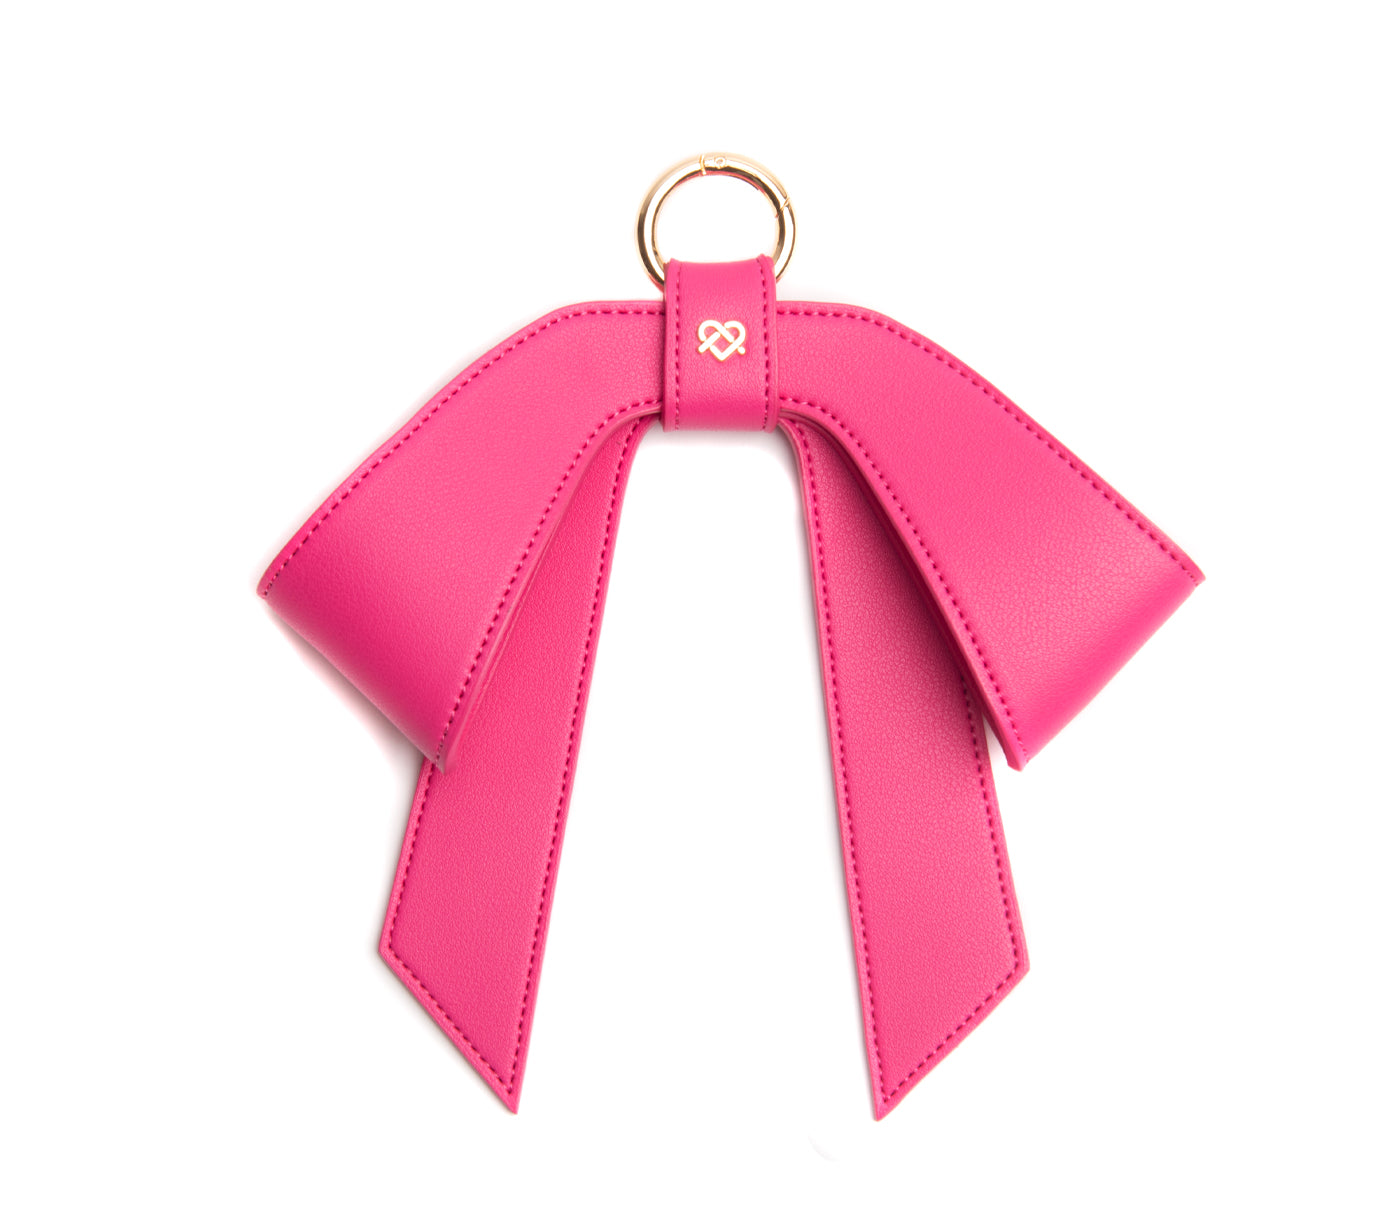 Cottontail Bow - Pink Leather Bag Charm